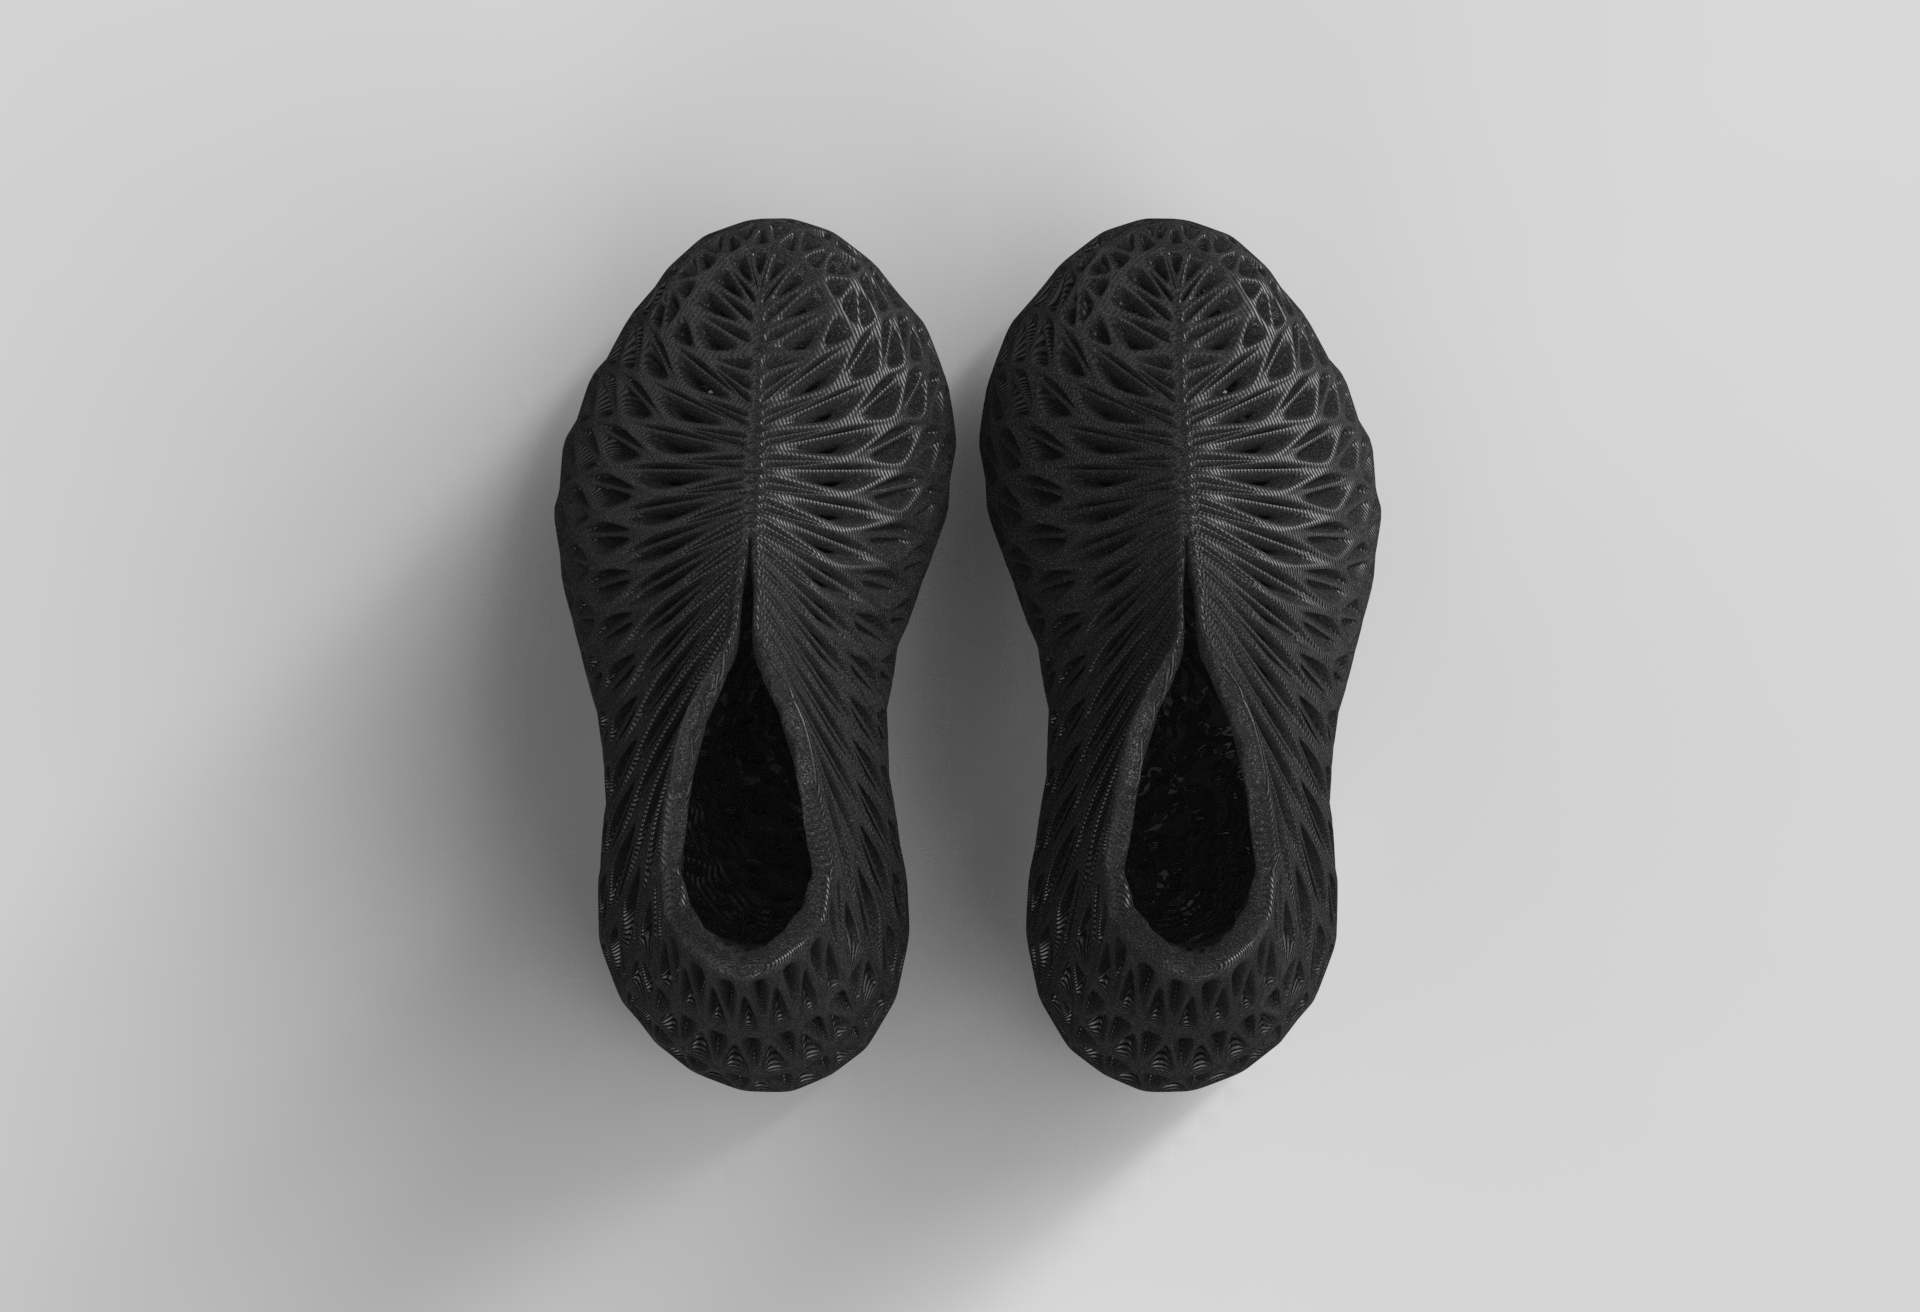 Exploring Computational Design, AI, and the Future of Fashion and Footwear in 3D Printing with Parametriks